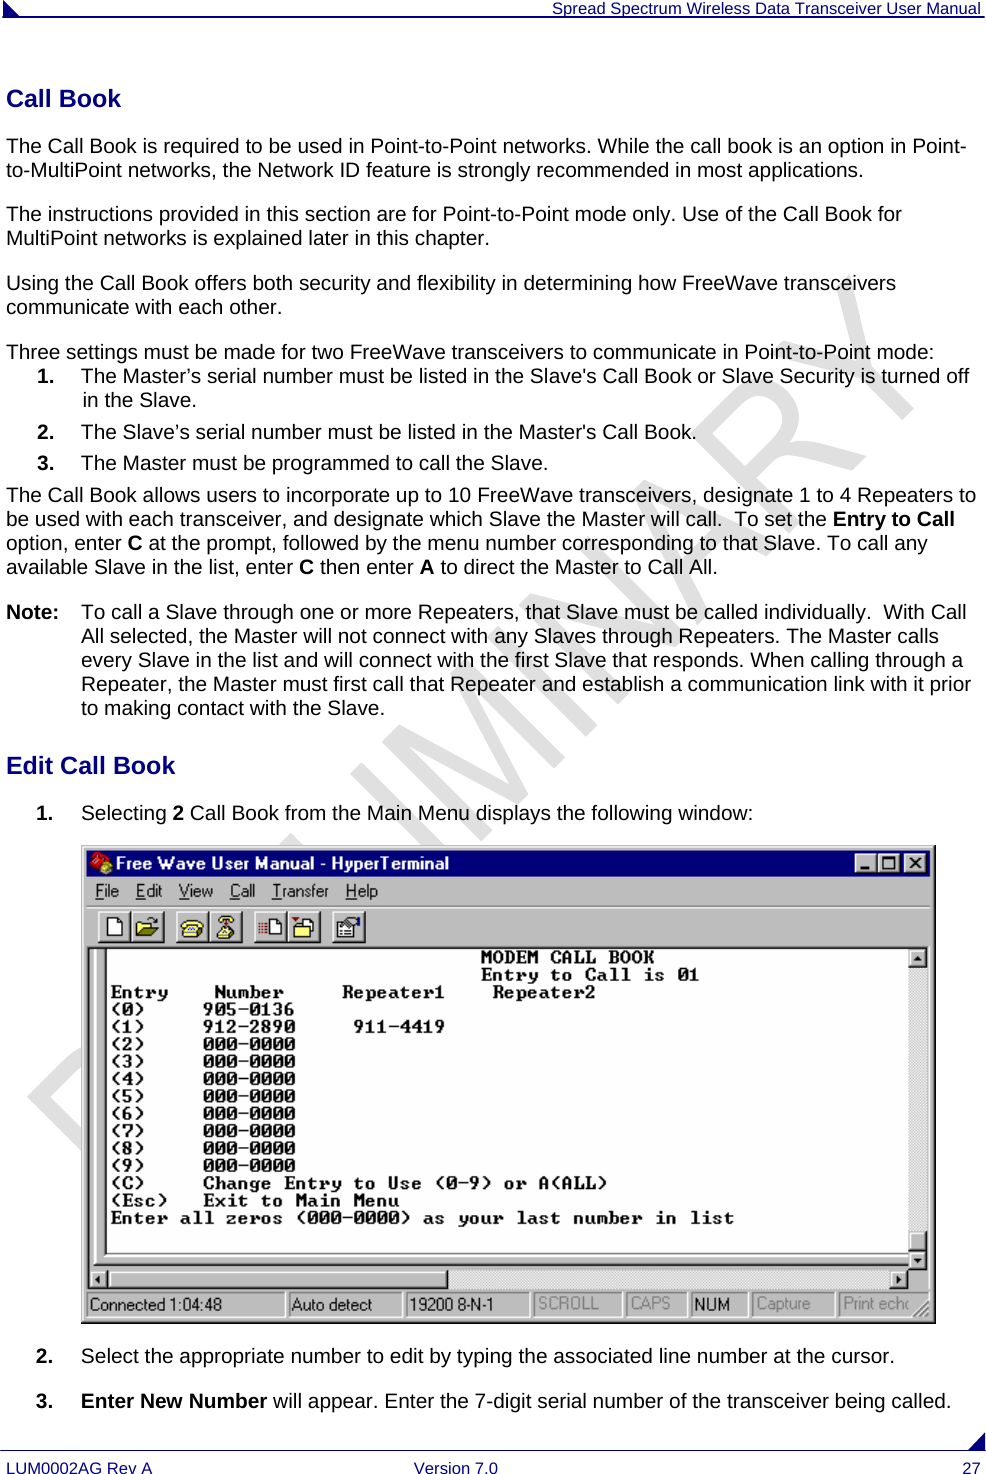  Spread Spectrum Wireless Data Transceiver User Manual LUM0002AG Rev A  Version 7.0  27 Call Book  The Call Book is required to be used in Point-to-Point networks. While the call book is an option in Point-to-MultiPoint networks, the Network ID feature is strongly recommended in most applications.  The instructions provided in this section are for Point-to-Point mode only. Use of the Call Book for MultiPoint networks is explained later in this chapter. Using the Call Book offers both security and flexibility in determining how FreeWave transceivers communicate with each other.  Three settings must be made for two FreeWave transceivers to communicate in Point-to-Point mode: 1.  The Master’s serial number must be listed in the Slave&apos;s Call Book or Slave Security is turned off in the Slave. 2.  The Slave’s serial number must be listed in the Master&apos;s Call Book. 3.  The Master must be programmed to call the Slave. The Call Book allows users to incorporate up to 10 FreeWave transceivers, designate 1 to 4 Repeaters to be used with each transceiver, and designate which Slave the Master will call.  To set the Entry to Call option, enter C at the prompt, followed by the menu number corresponding to that Slave. To call any available Slave in the list, enter C then enter A to direct the Master to Call All. Note:  To call a Slave through one or more Repeaters, that Slave must be called individually.  With Call All selected, the Master will not connect with any Slaves through Repeaters. The Master calls every Slave in the list and will connect with the first Slave that responds. When calling through a Repeater, the Master must first call that Repeater and establish a communication link with it prior to making contact with the Slave.  Edit Call Book                                                                                                                                      1.  Selecting 2 Call Book from the Main Menu displays the following window:  2.  Select the appropriate number to edit by typing the associated line number at the cursor. 3. Enter New Number will appear. Enter the 7-digit serial number of the transceiver being called. 